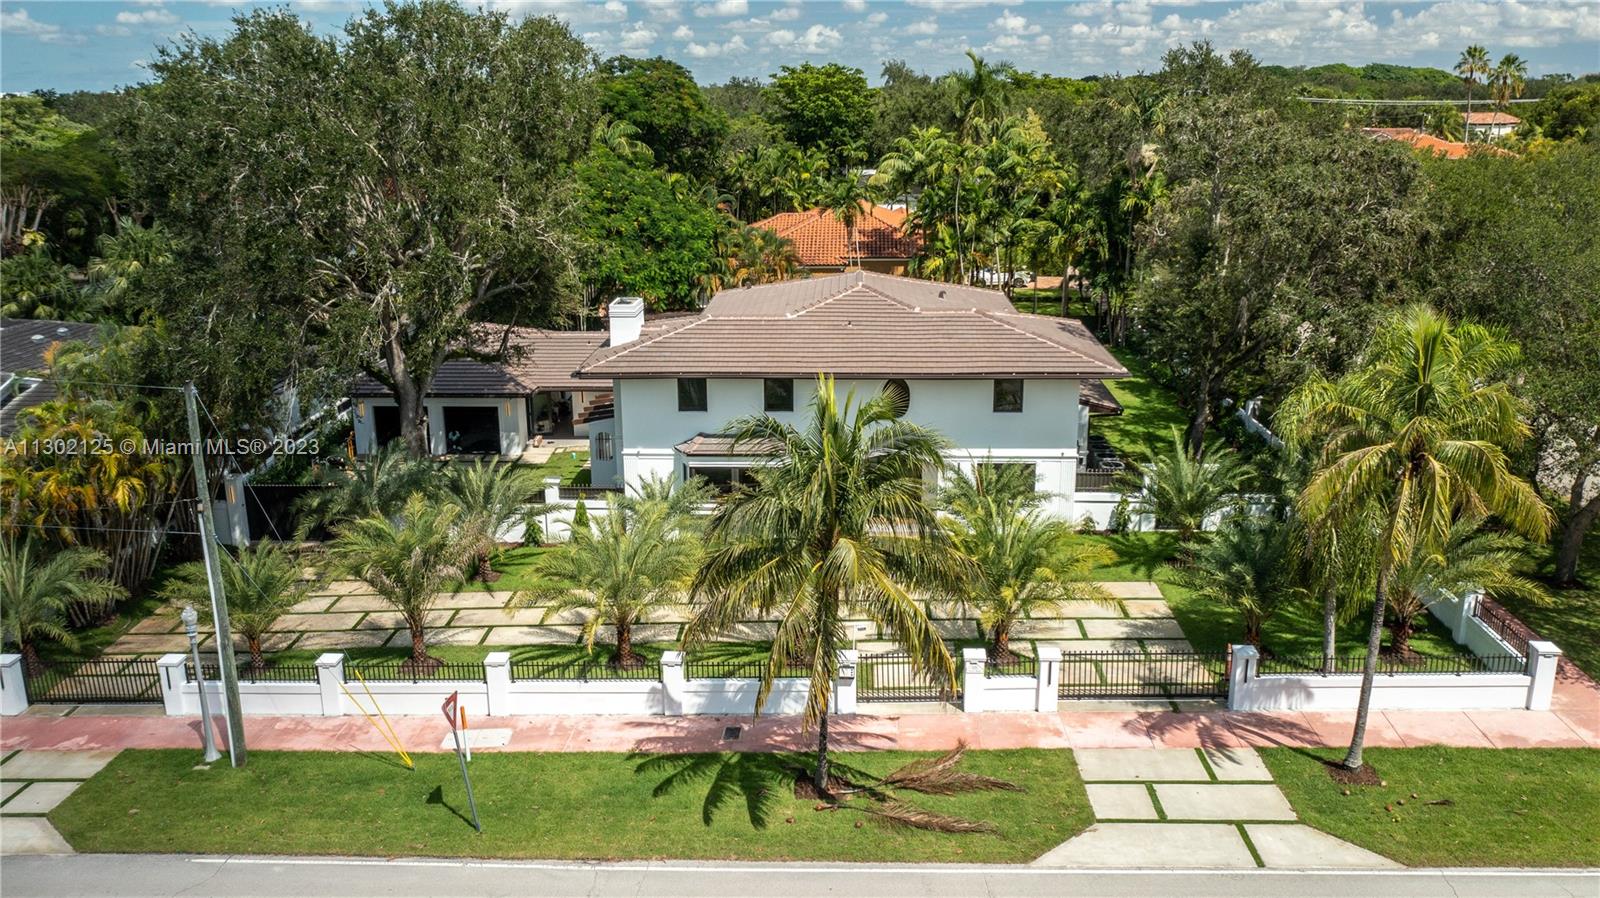 Check out this stunning home in the prime location of Coral Gables on an oversized corner lot. This home is completely custom built with high end modern finishes. Gourmet kitchen features custom modern cabinetry, accent lighting, oversized island, double sinks, quartzite countertops, Miele appliances and gas stove. Wood flooring throughout adds elegance to every room. Each bedroom has it's own bath and an additional half bath for living area. Master bedroom has a wet bar as well as the entertainment room and family room. Laundry room with double washer and dryer. Two car garage. Outside, enjoy the gas heated pool and ample deck area with a roofed terrace and balcony upstairs. Smart home features. Owner financing available. Estimated completion July 2023. available for rent MLS#A11390315